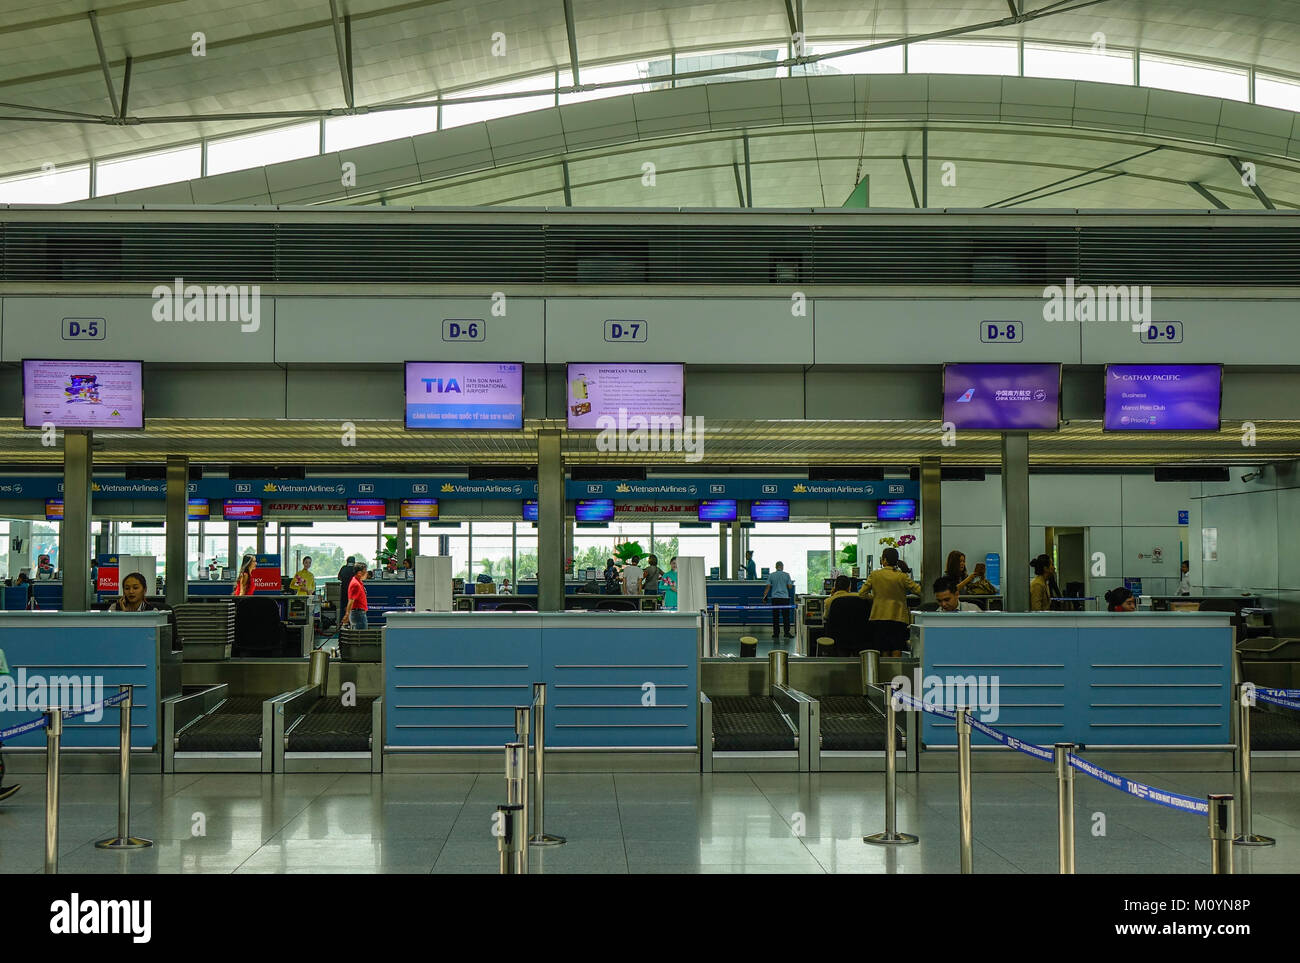 Saigon, Vietnam - Mar 28, 2017. Check-in counters of Tan Son Nhat Airport in Saigon, Vietnam. The Airport was one of the busiest military airbases in  Stock Photo